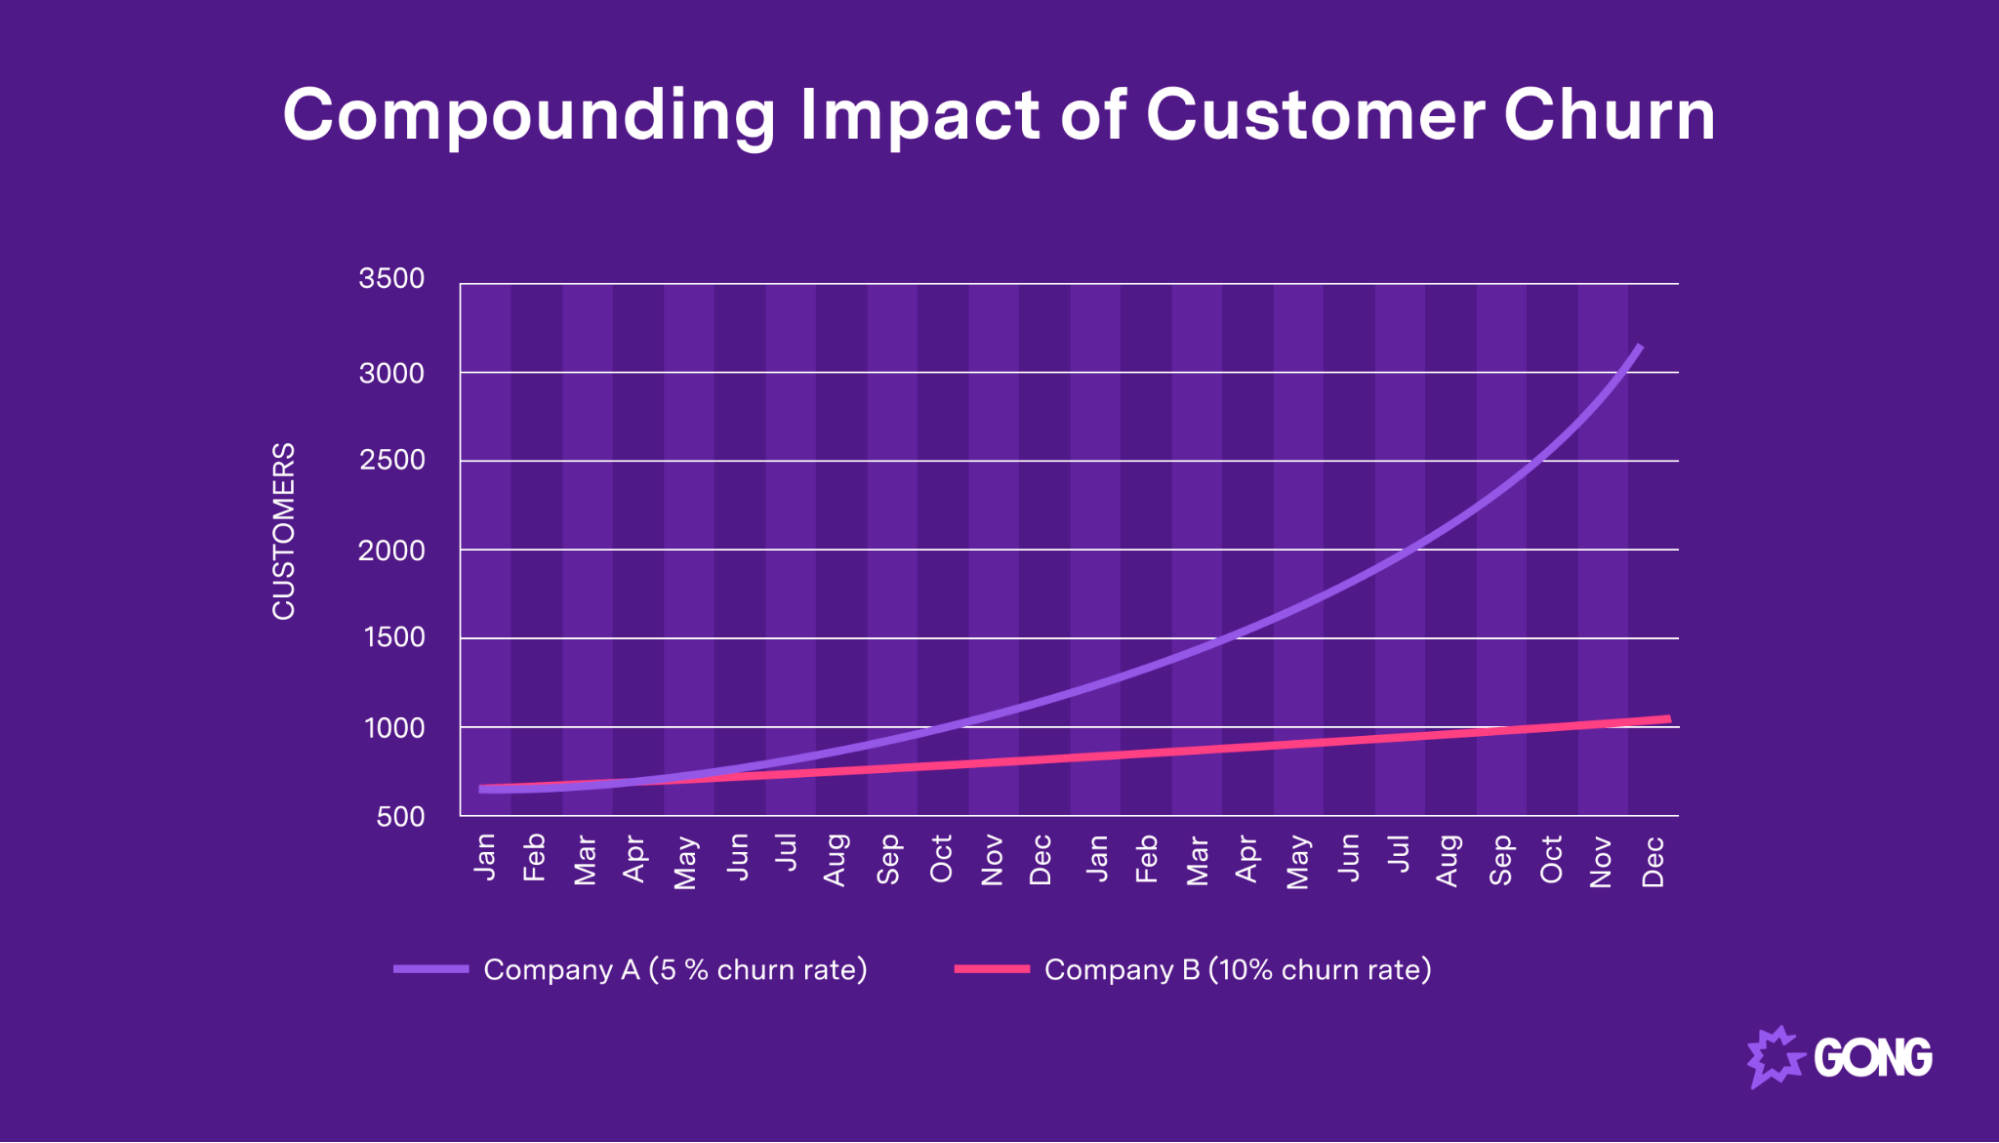 Graph illustrating the compounding impact of customer churn